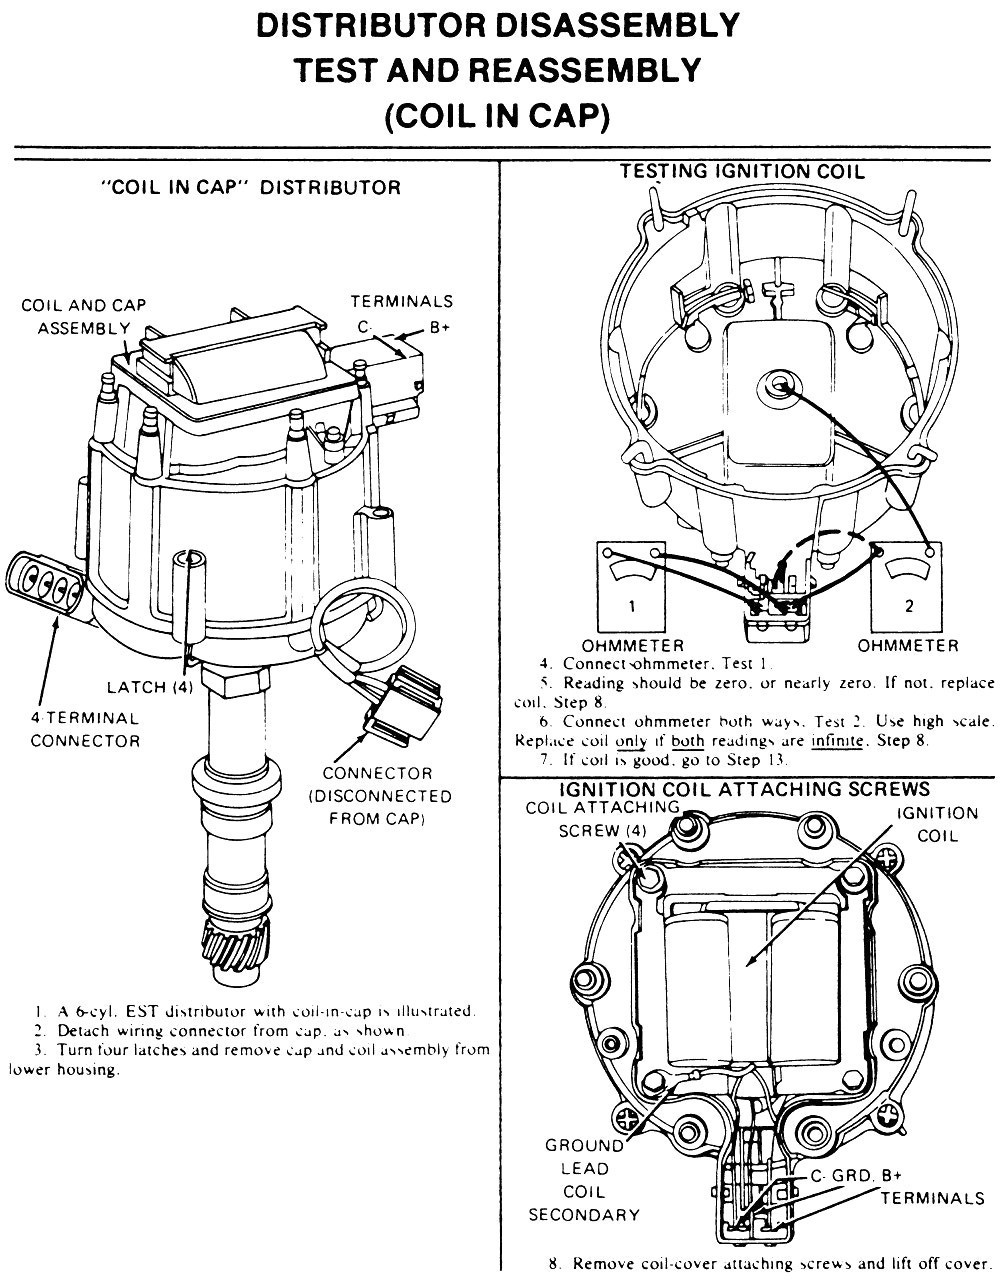 Wiring Diagram For Joe Hunt Hei Distributor Alkydigger Amazing Wire With Ford 302 Msd